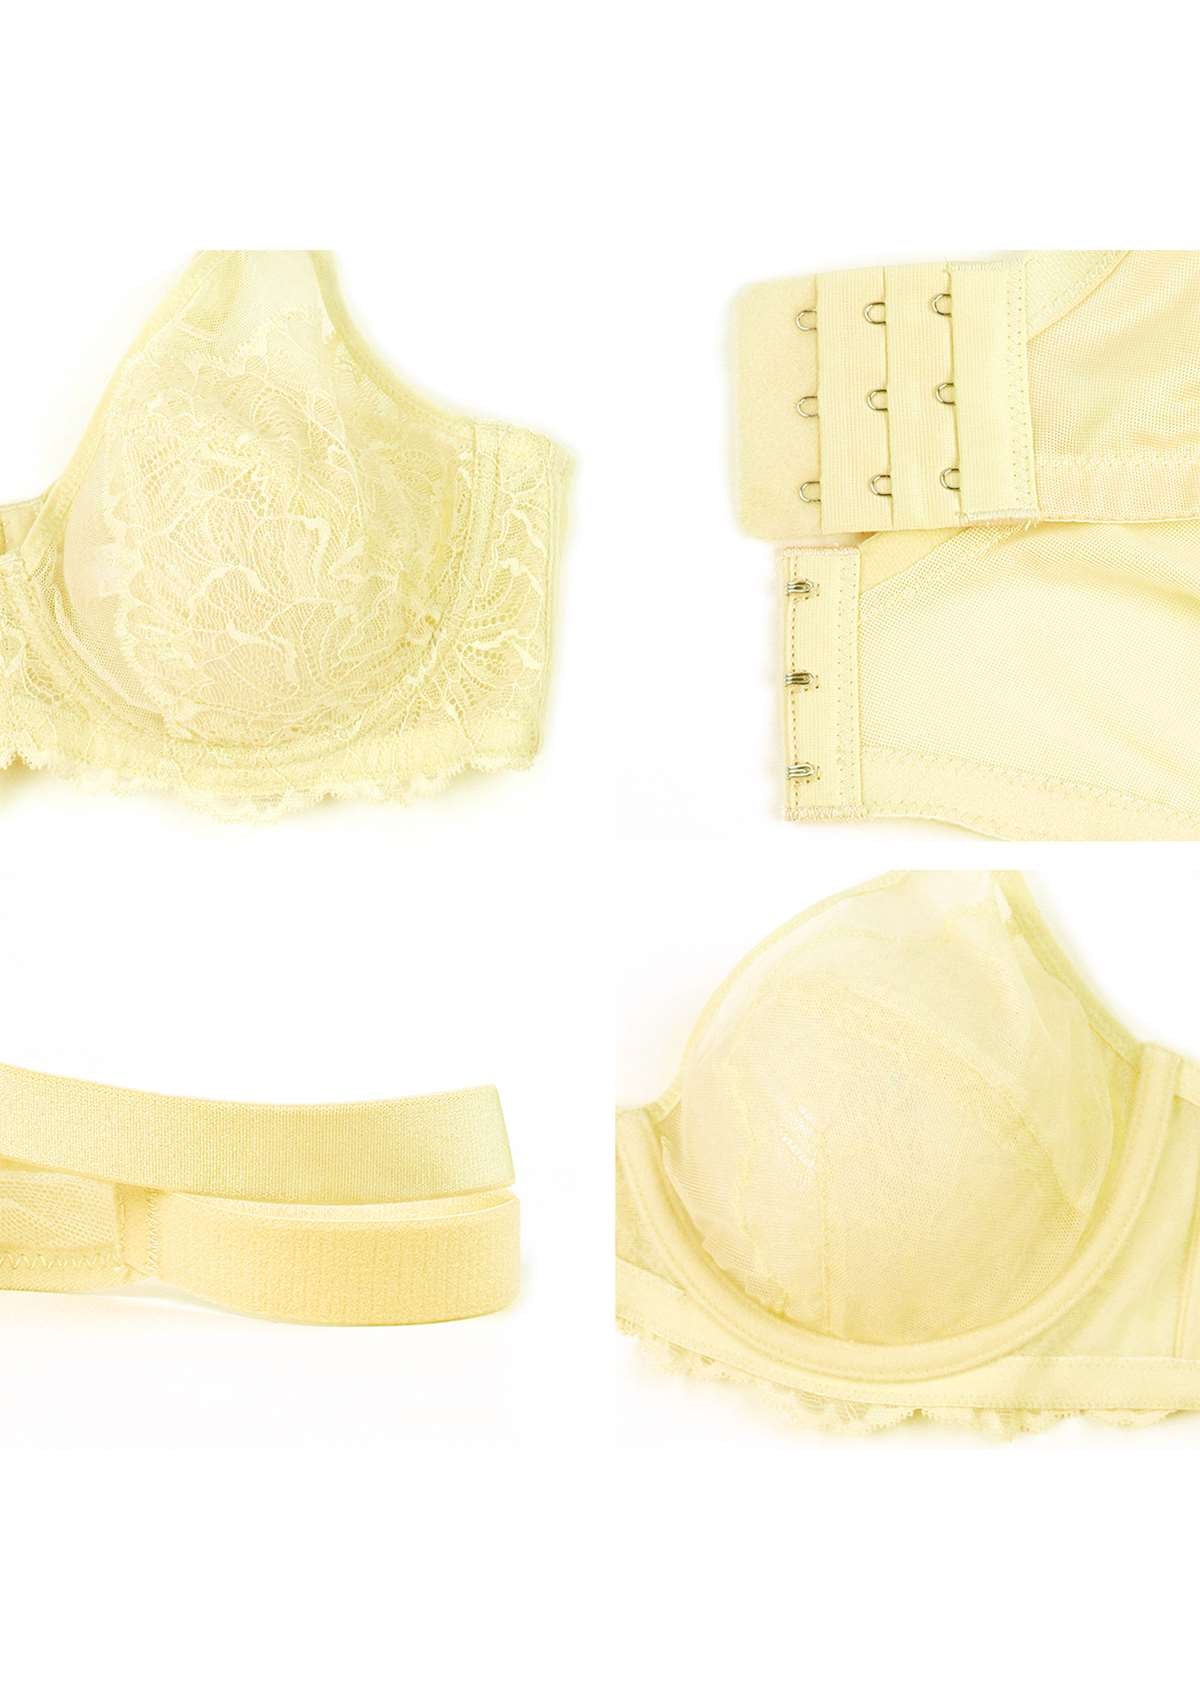 HSIA Blossom Full Coverage Side Support Bra: Designed For Heavy Busts - Light Yellow / 42 / H